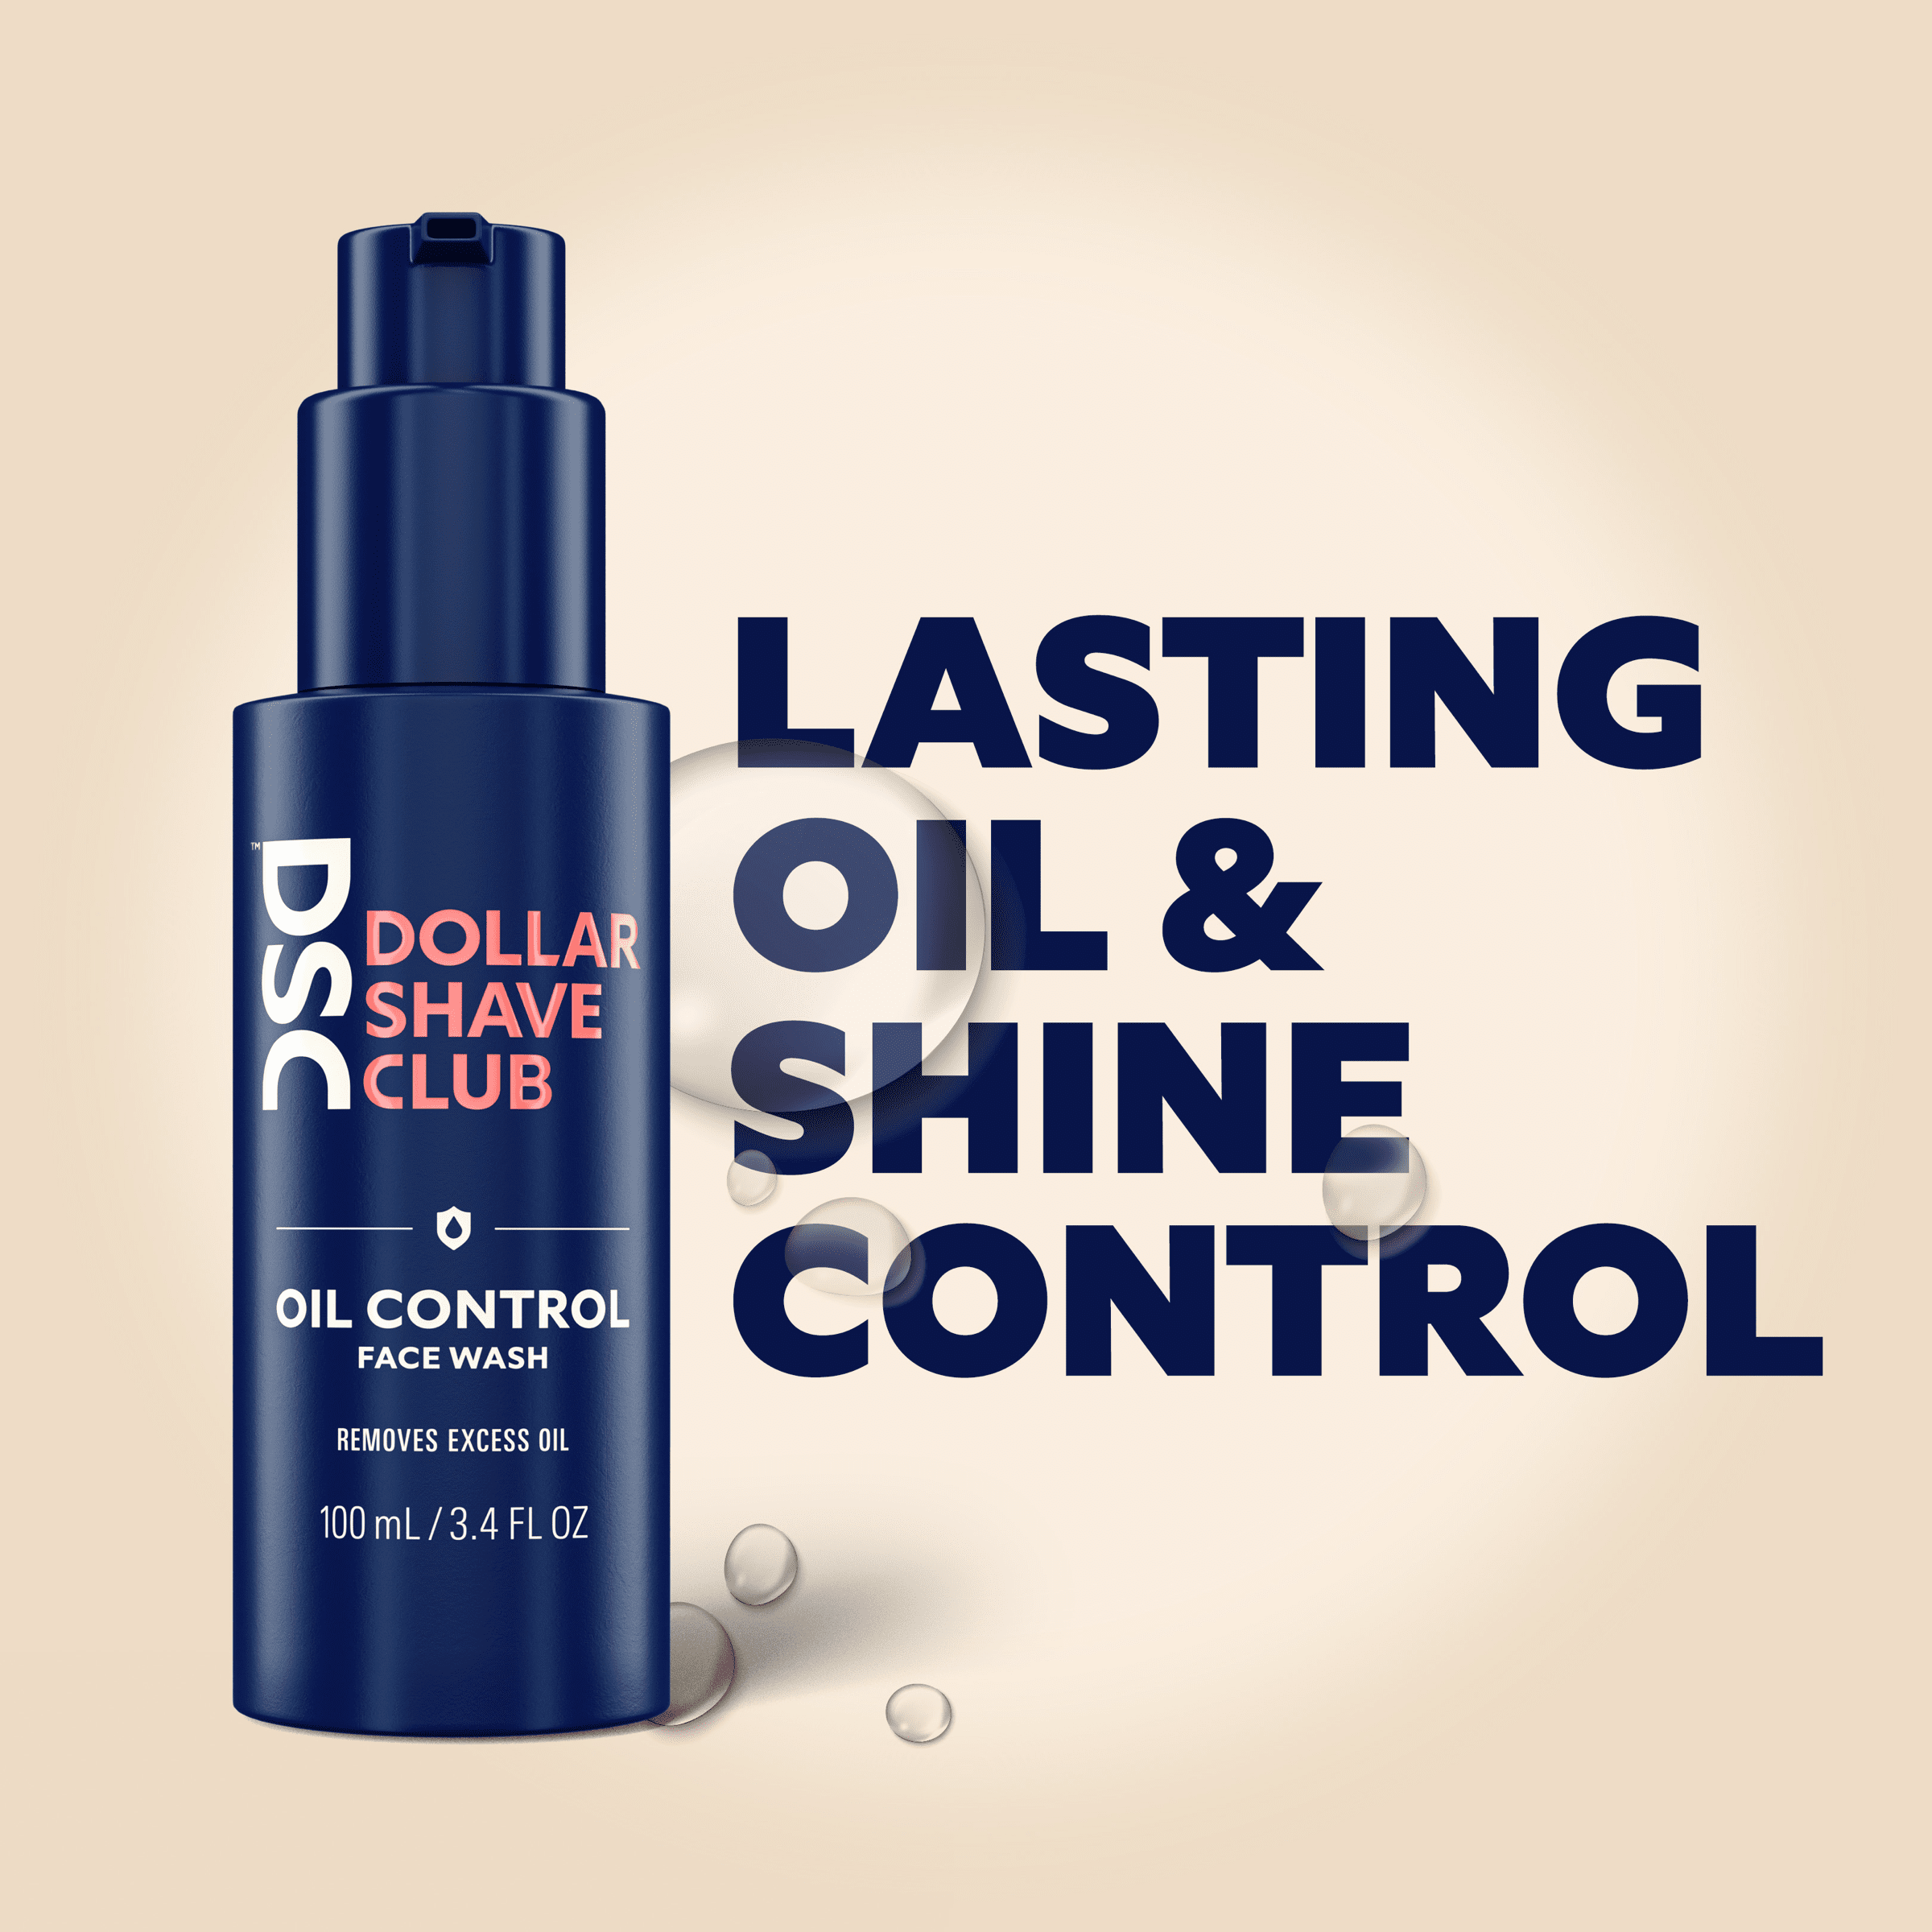 Dollar Shave Club Oil Control Face Wash controls oil and shine.